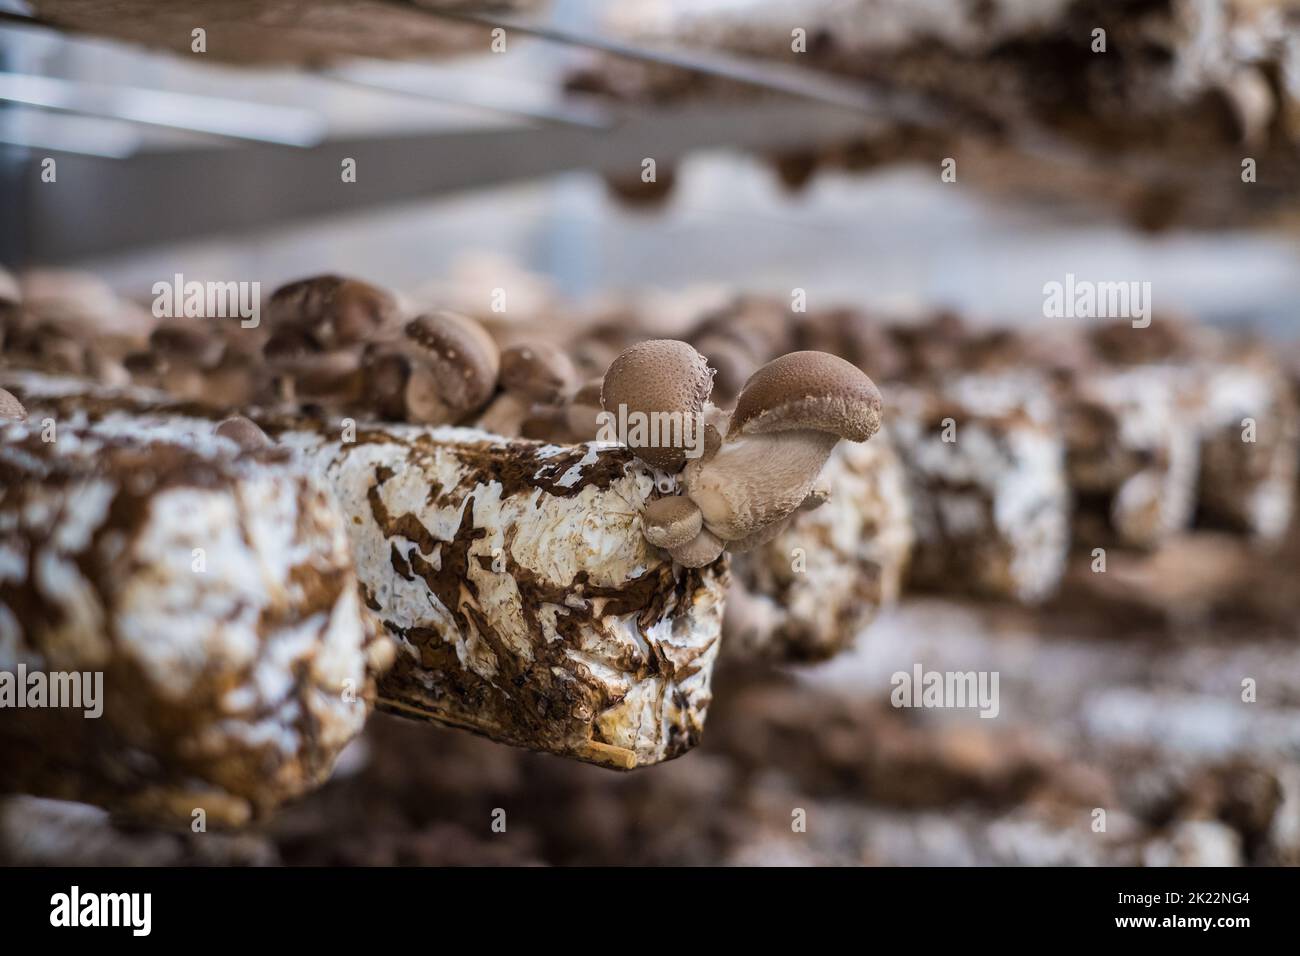 Shiitake mushrooms cultivated in vertical mushroom farm growing on substrate. Stock Photo